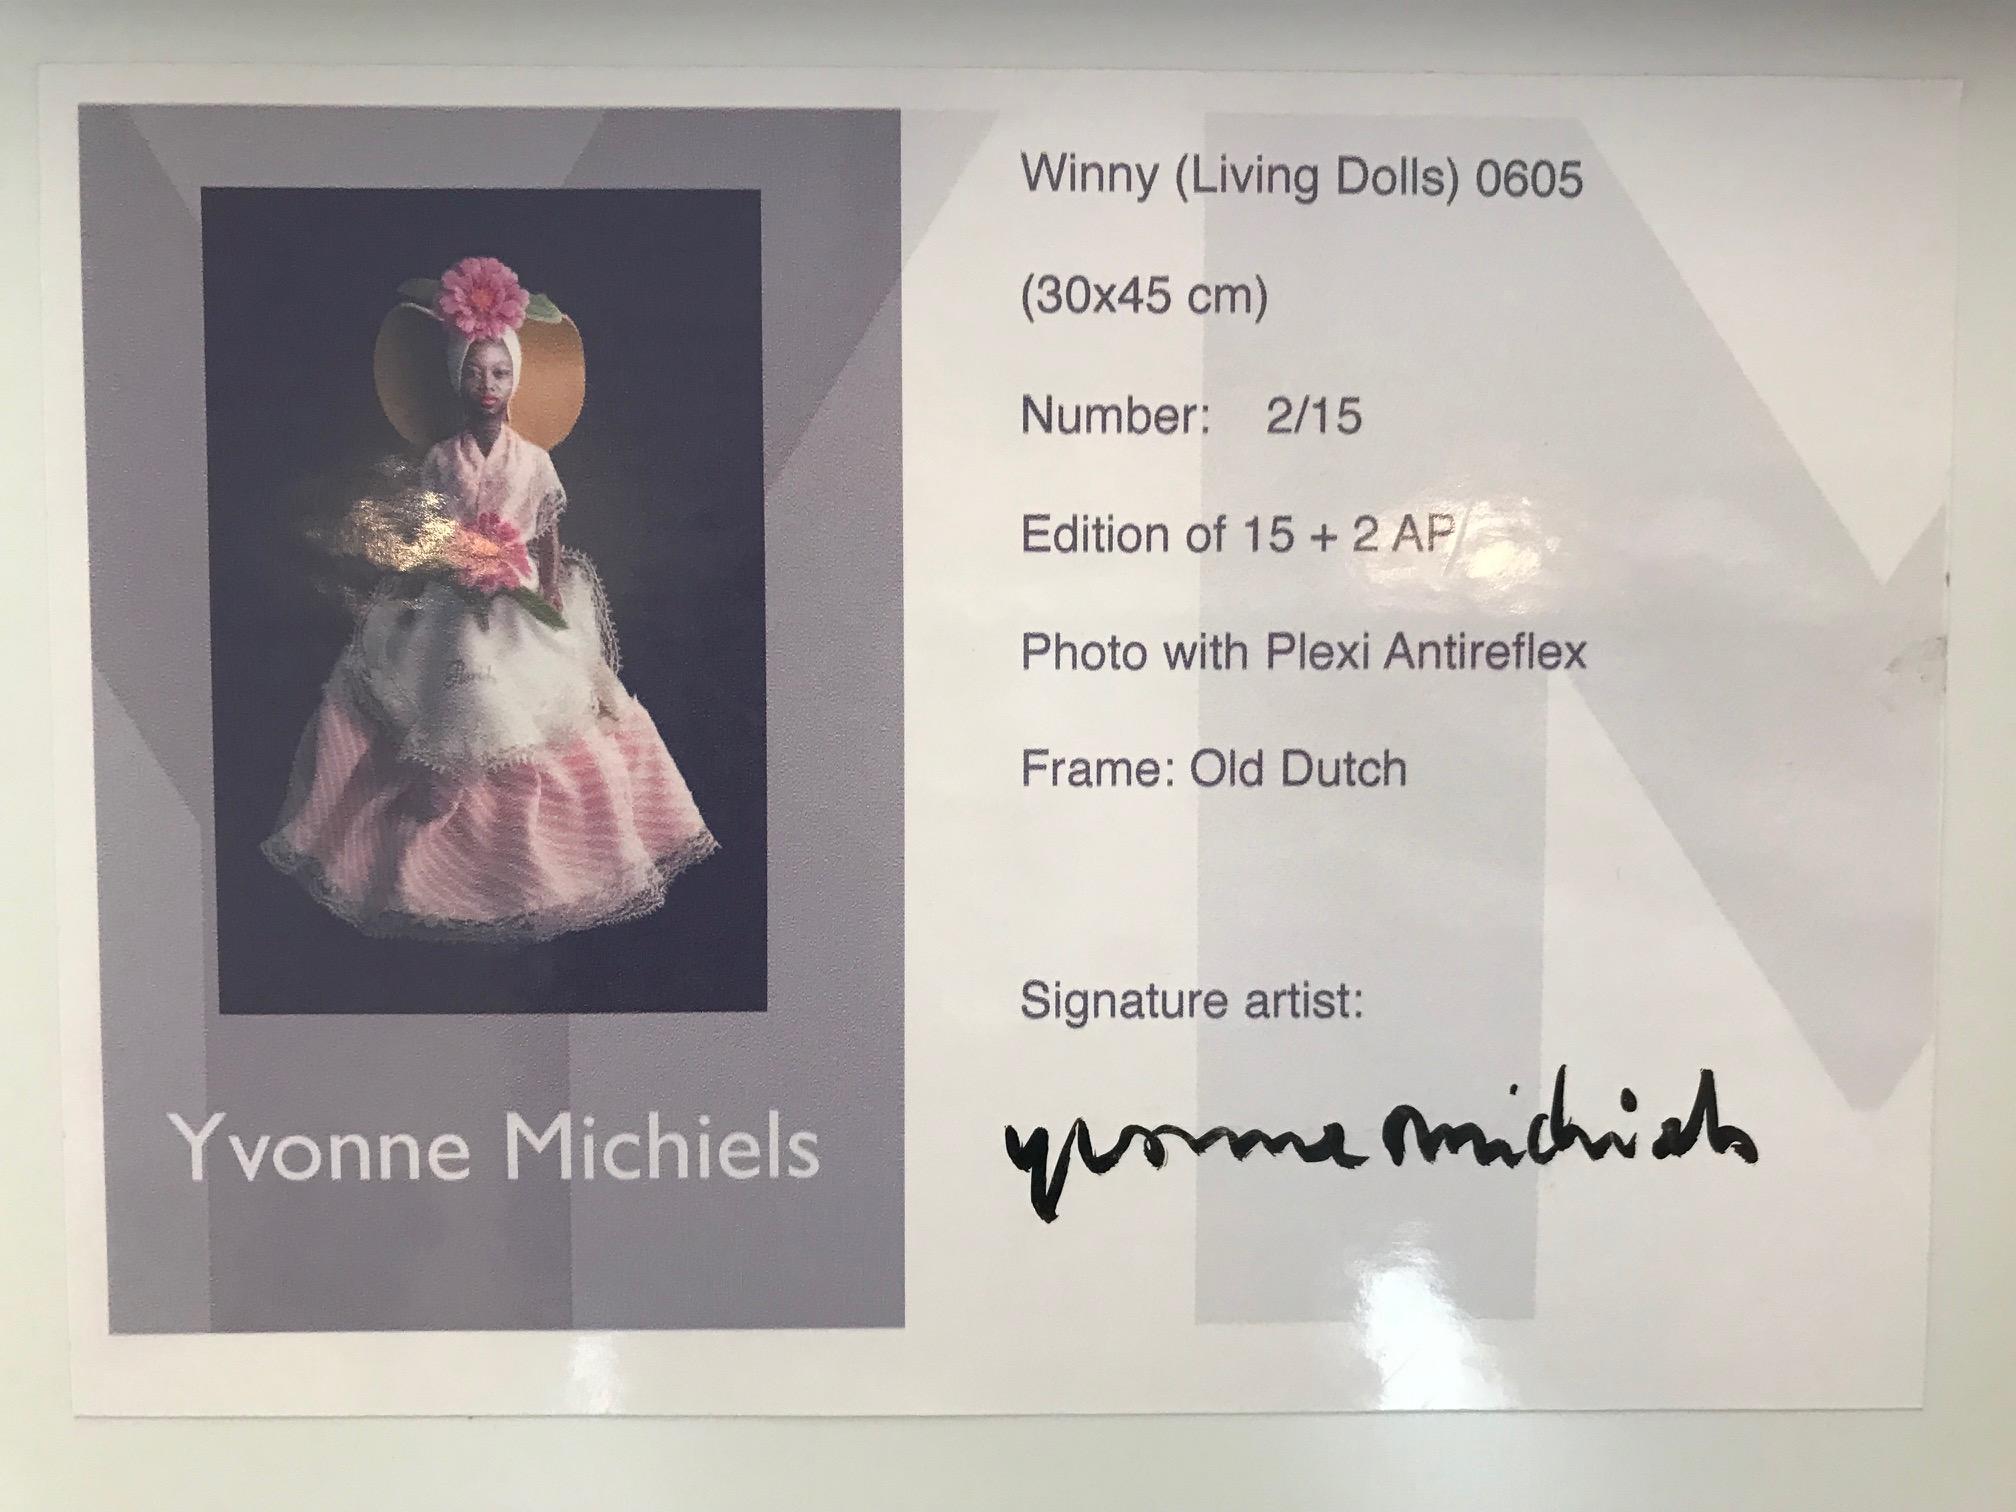 In her art, Dutch photographer Yvonne Michiels (1966) depicts personal stories about beauty, emotions and mortality. 

Yvonne’s Living Dolls series is her interpretation of the struggle of young people with their appearance and identity. Sometimes